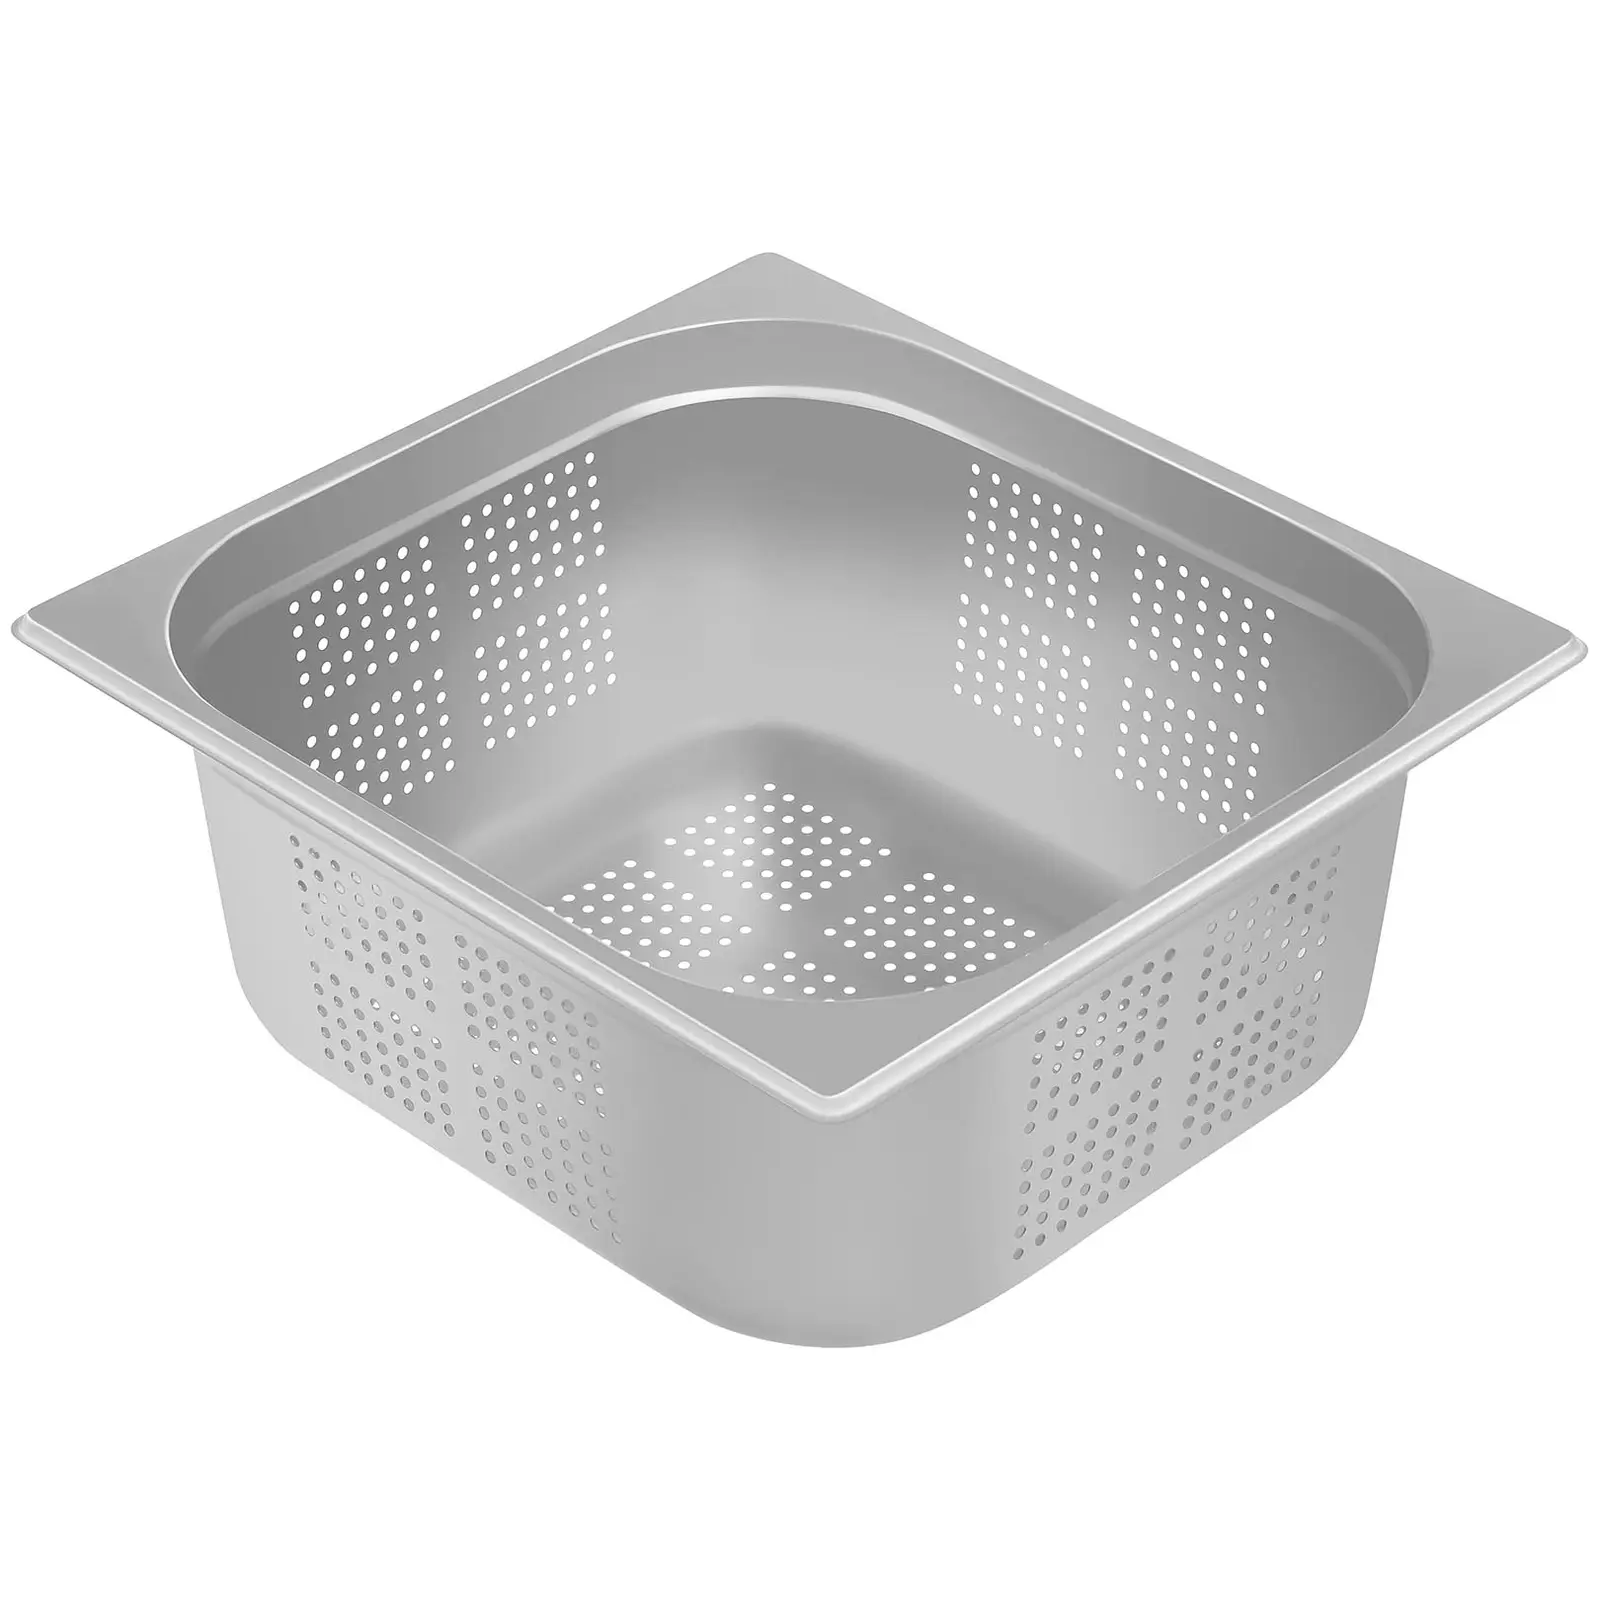 Gastronorm Tray - 2/3 - 150 mm - Perforated